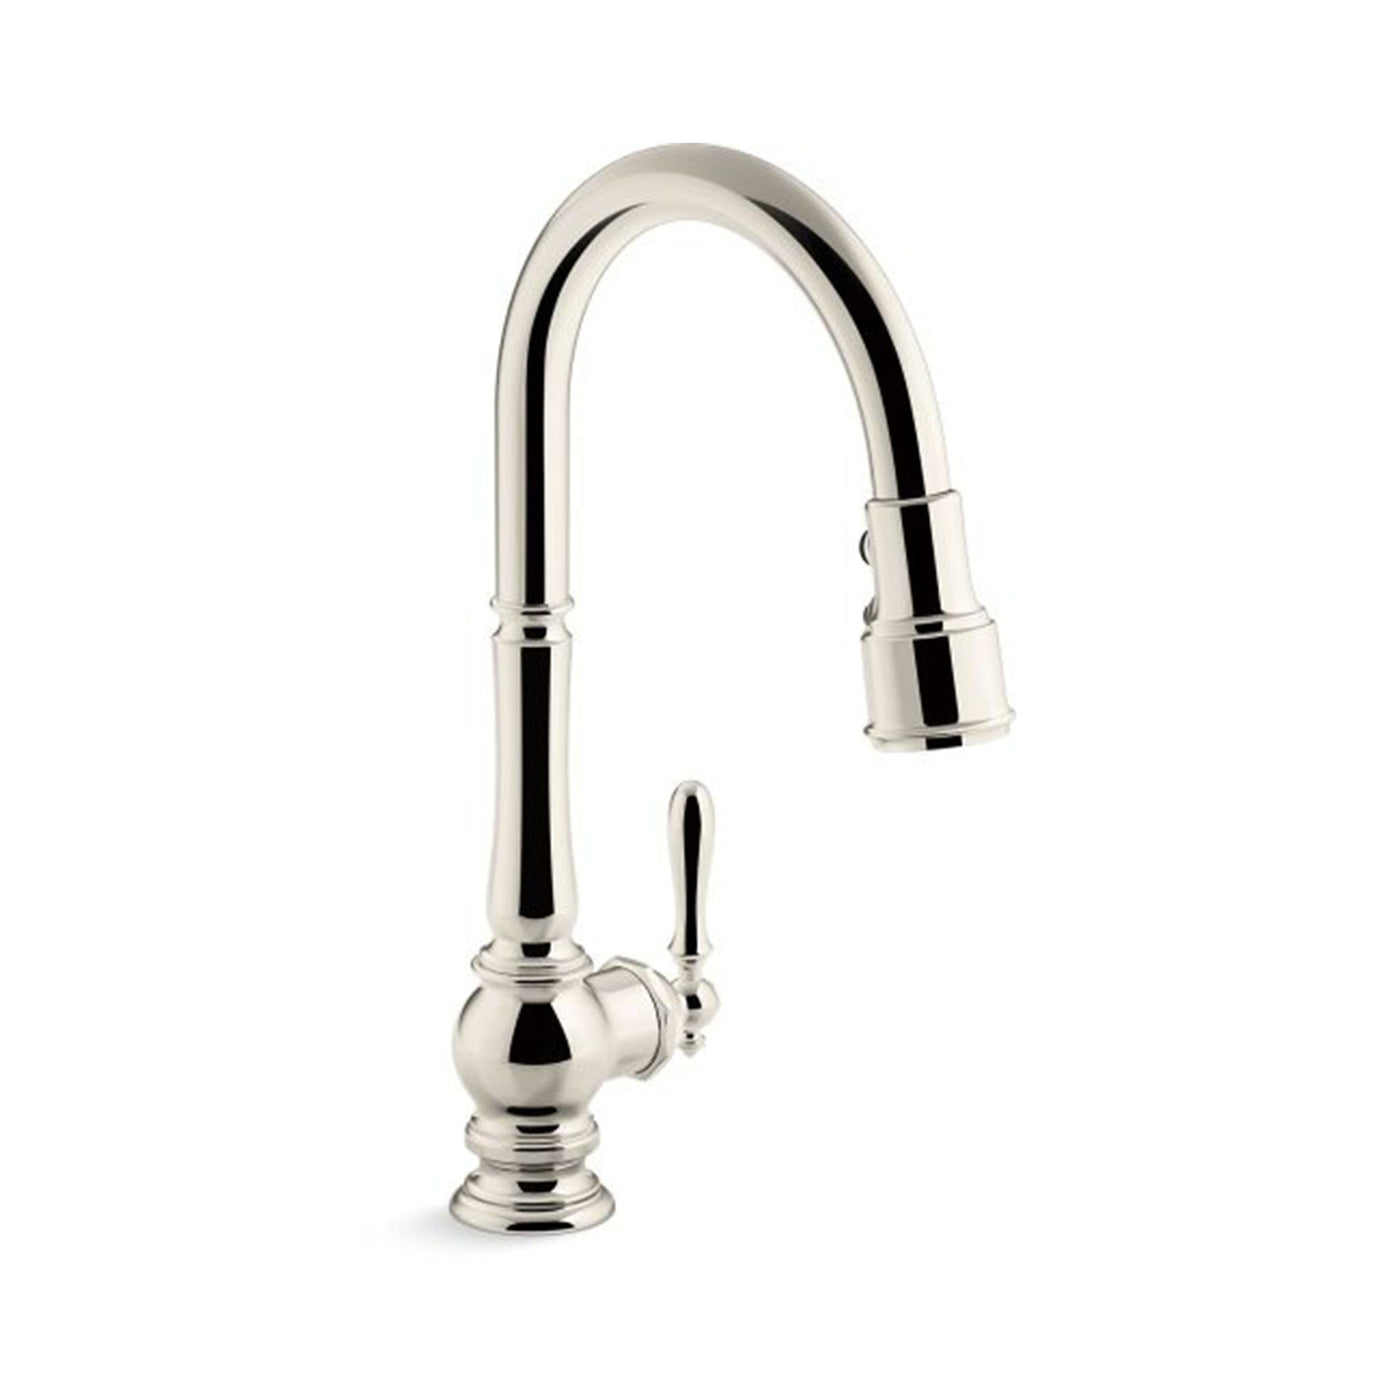 Artifacts® Pull-down kitchen sink faucet with three-function sprayhead